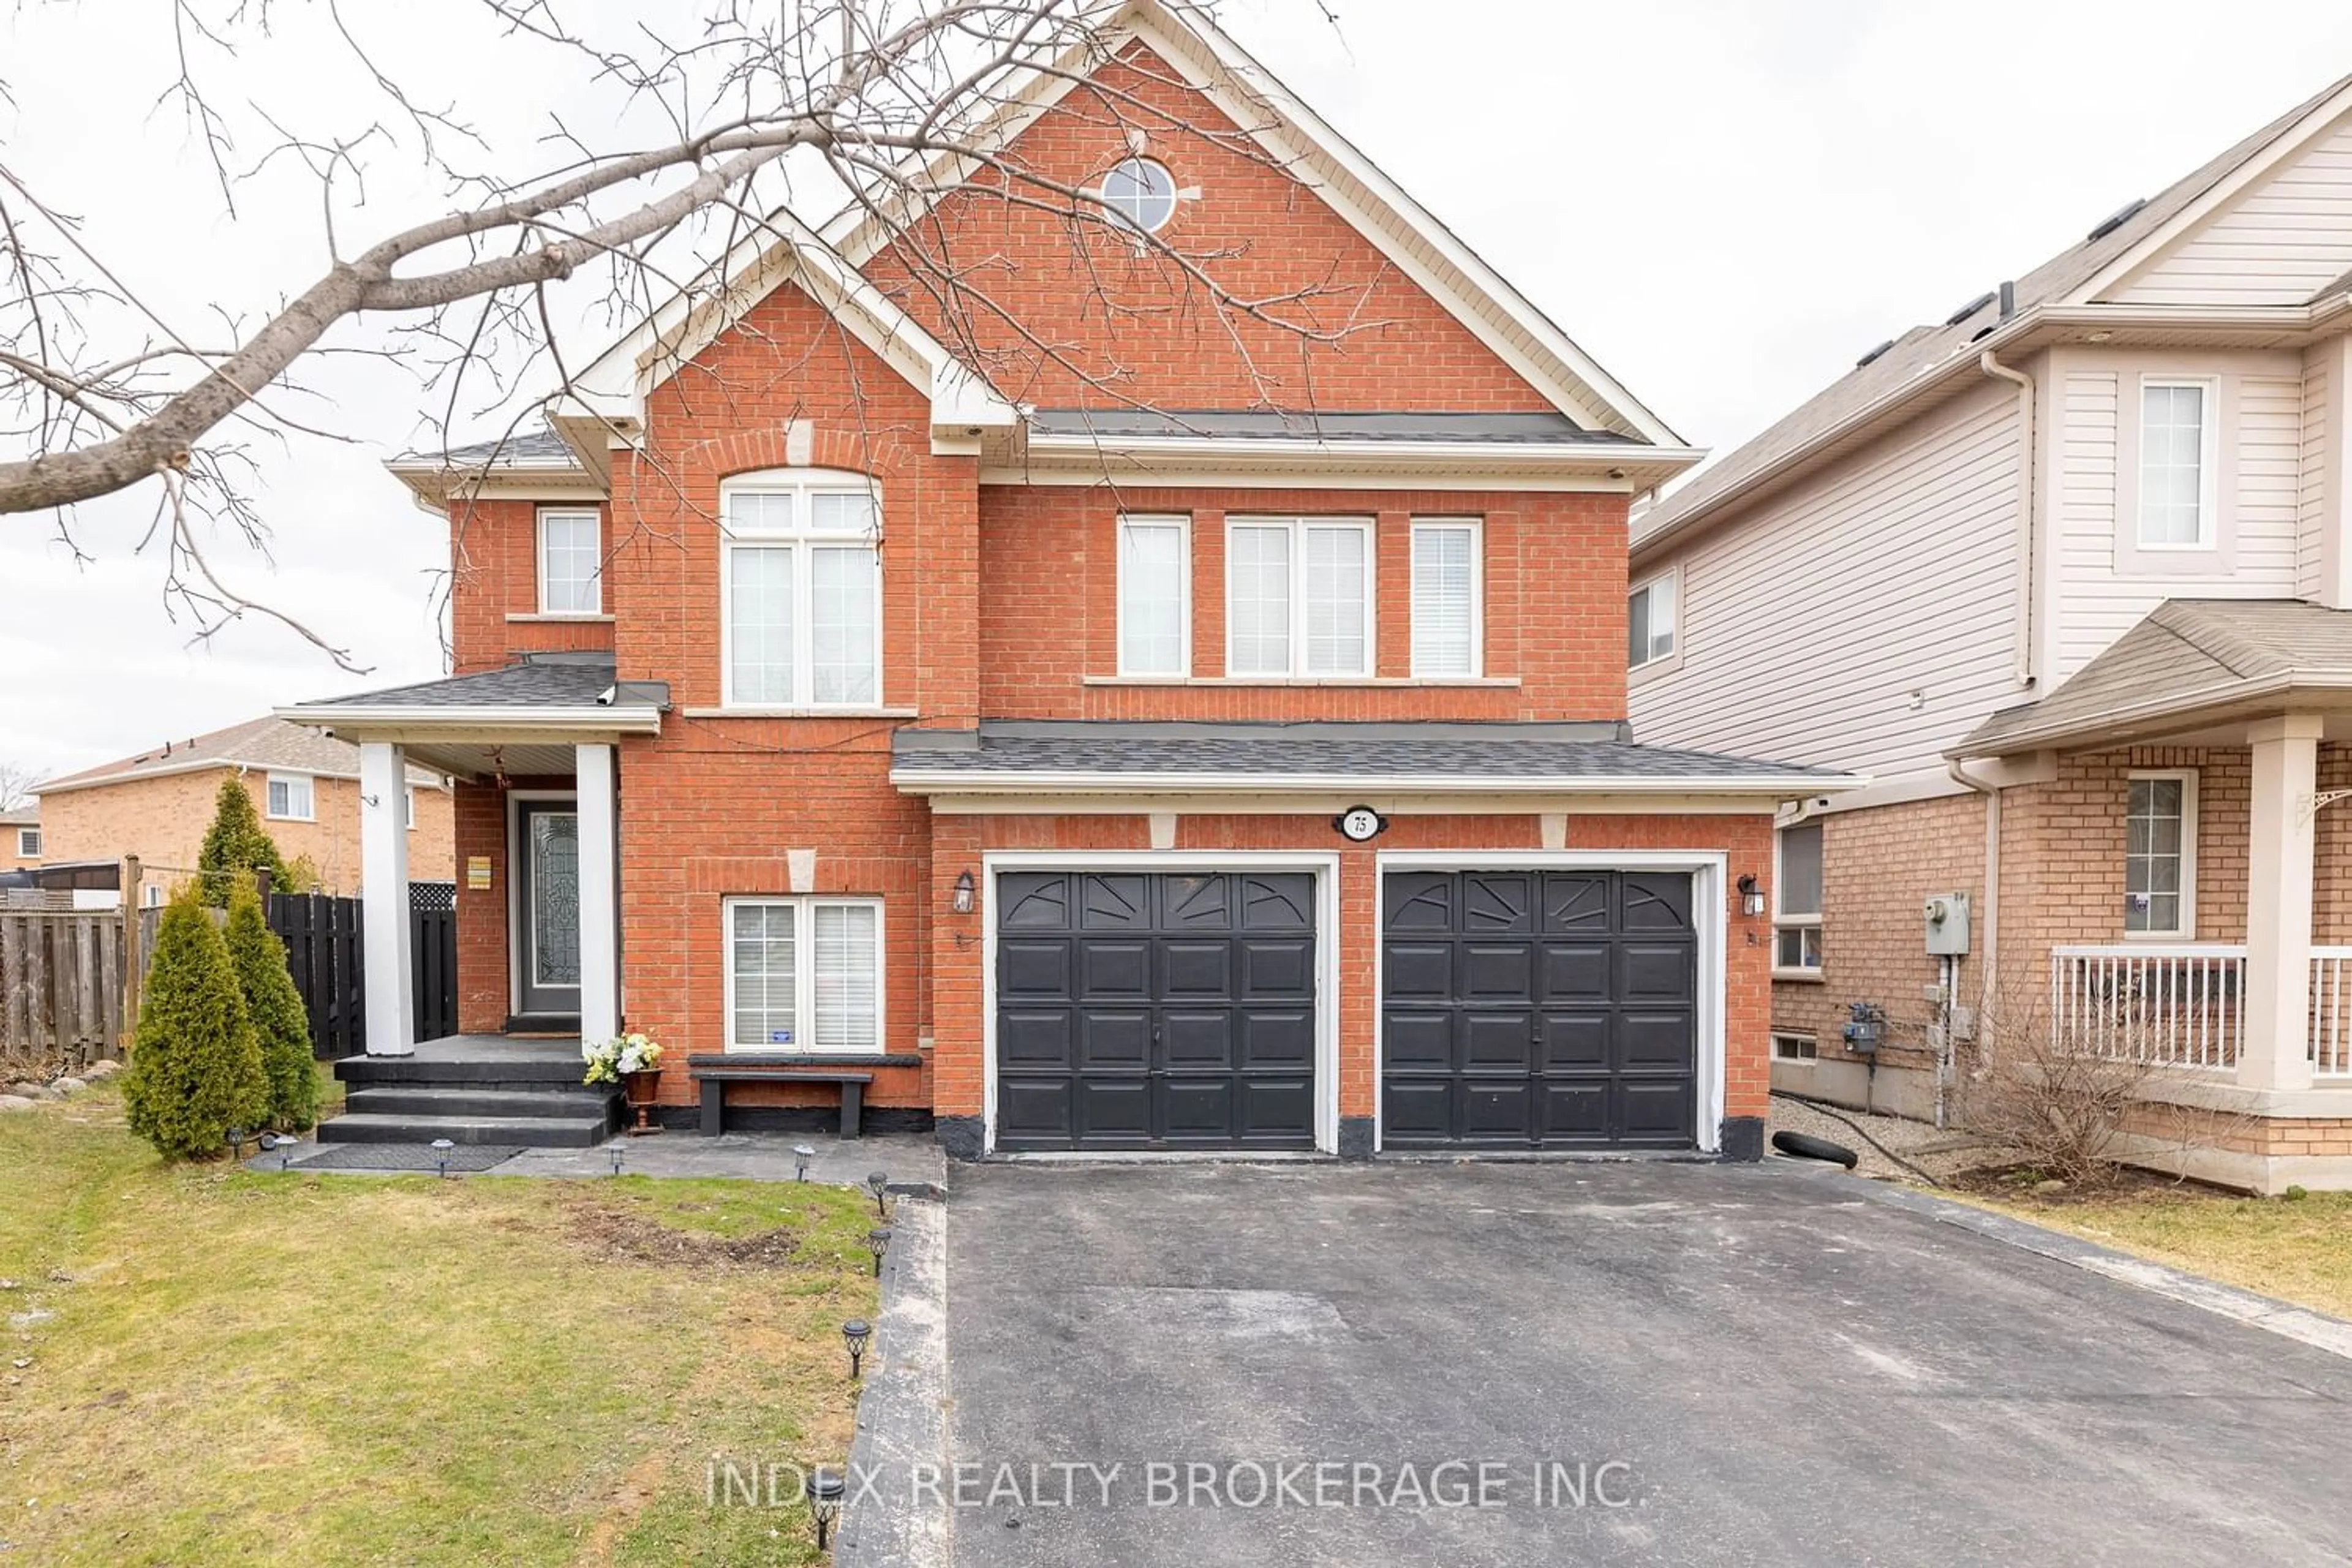 Home with brick exterior material for 75 Milkweed Cres, Brampton Ontario L7A 2G5